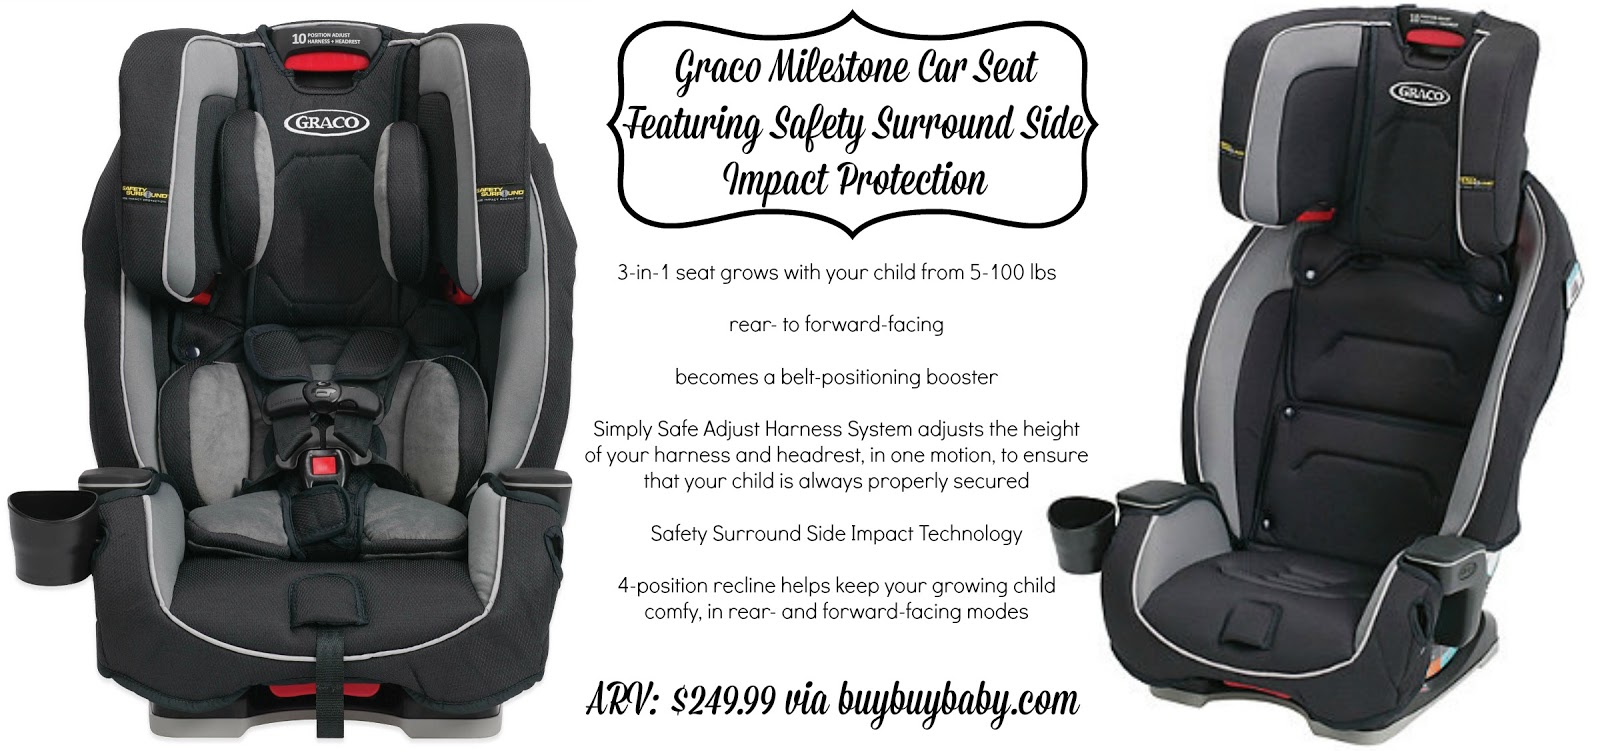 graco faa approved car seats